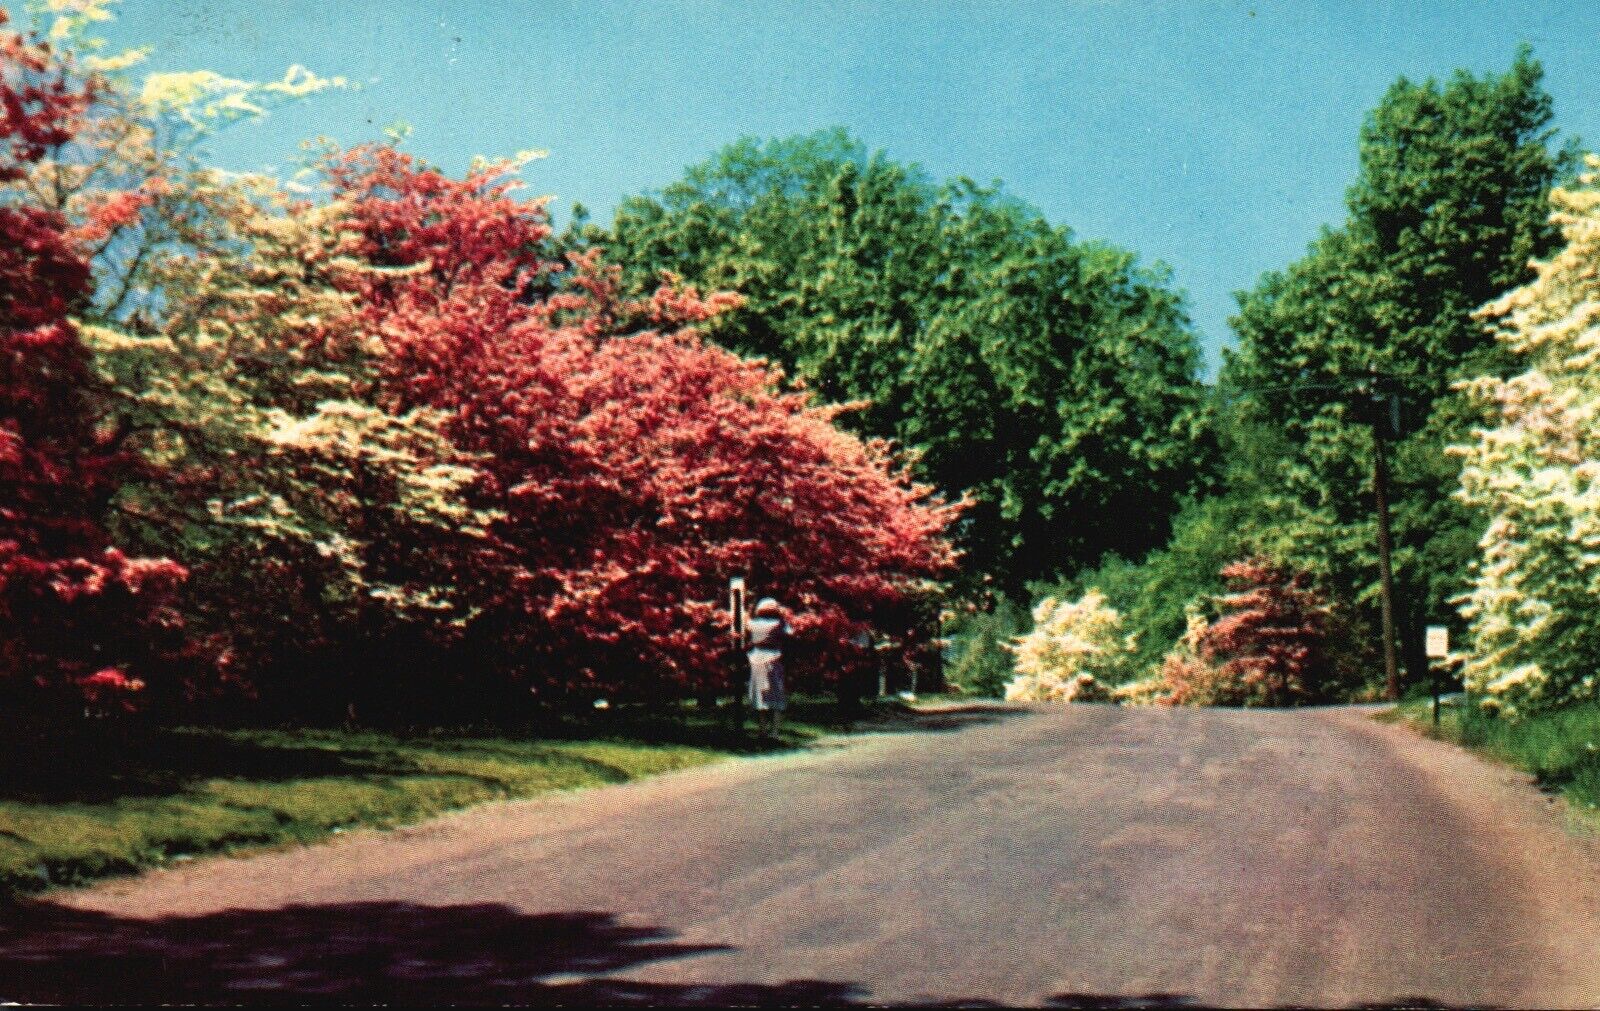 Flowering Dogwood Trees on a Connecticut Road, CT, 1955 Vintage Postcard a9175